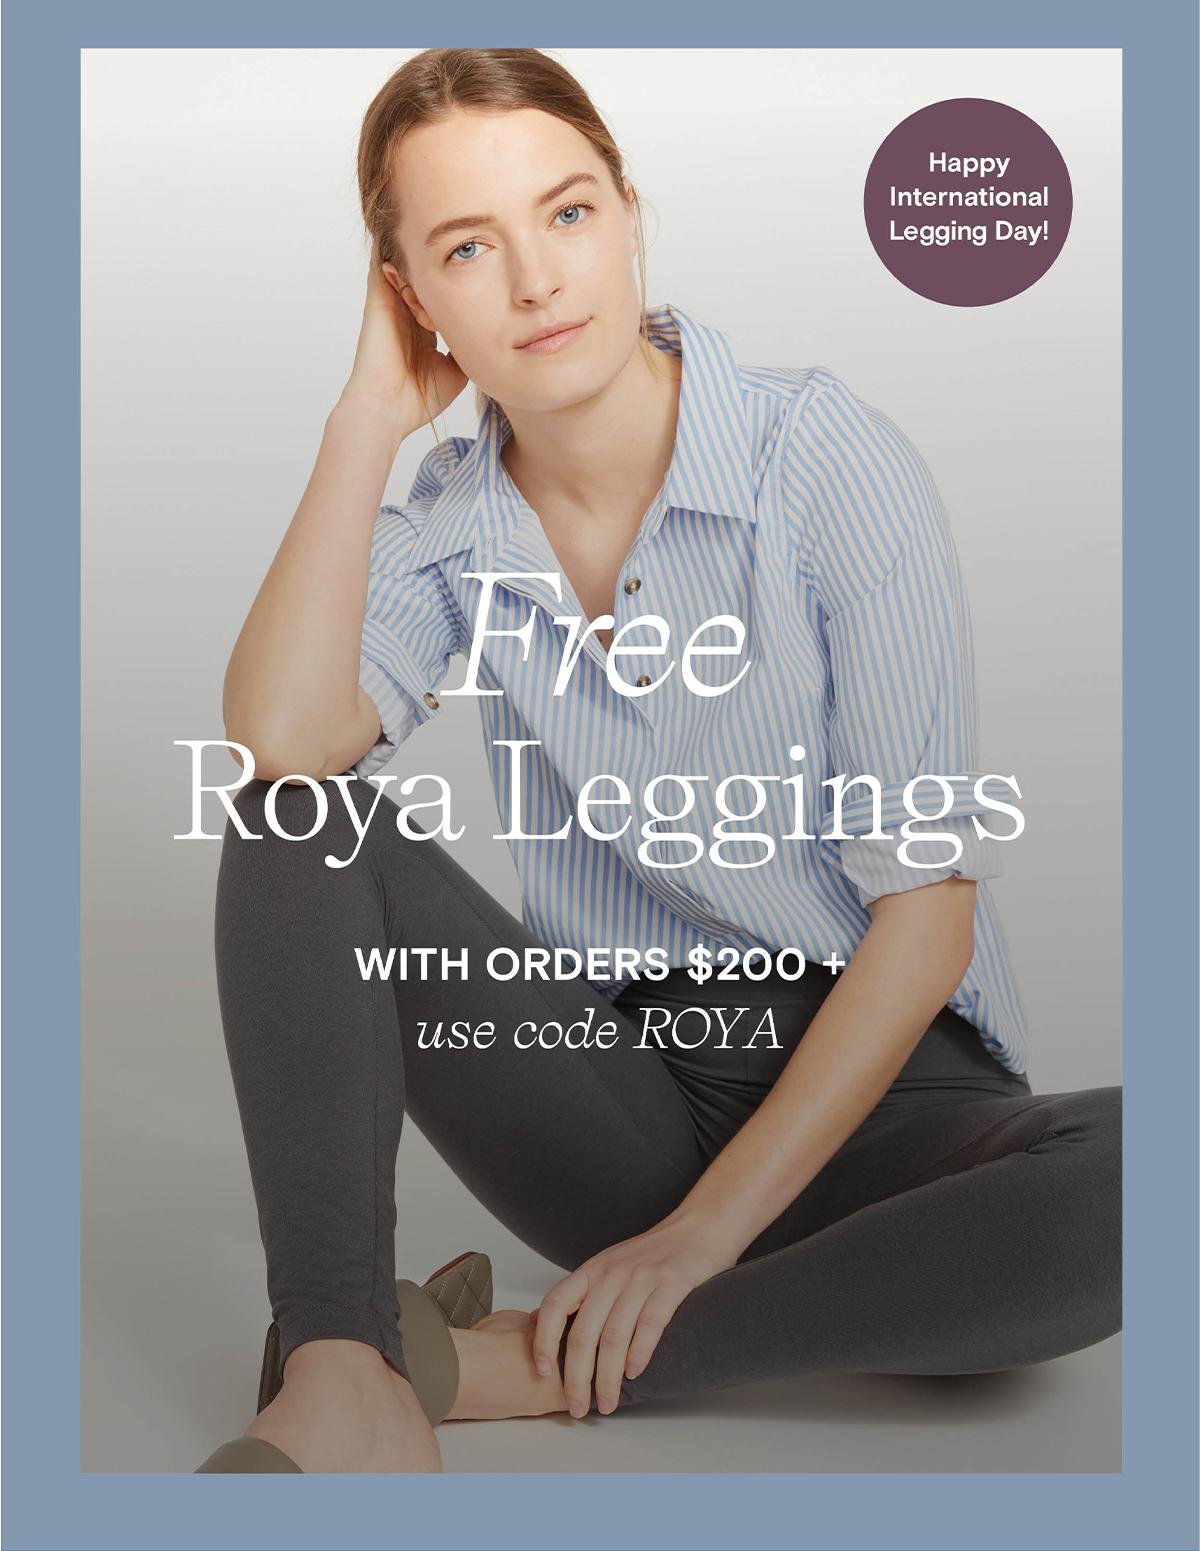 Get a free pair of Roya leggings with a $200 spend